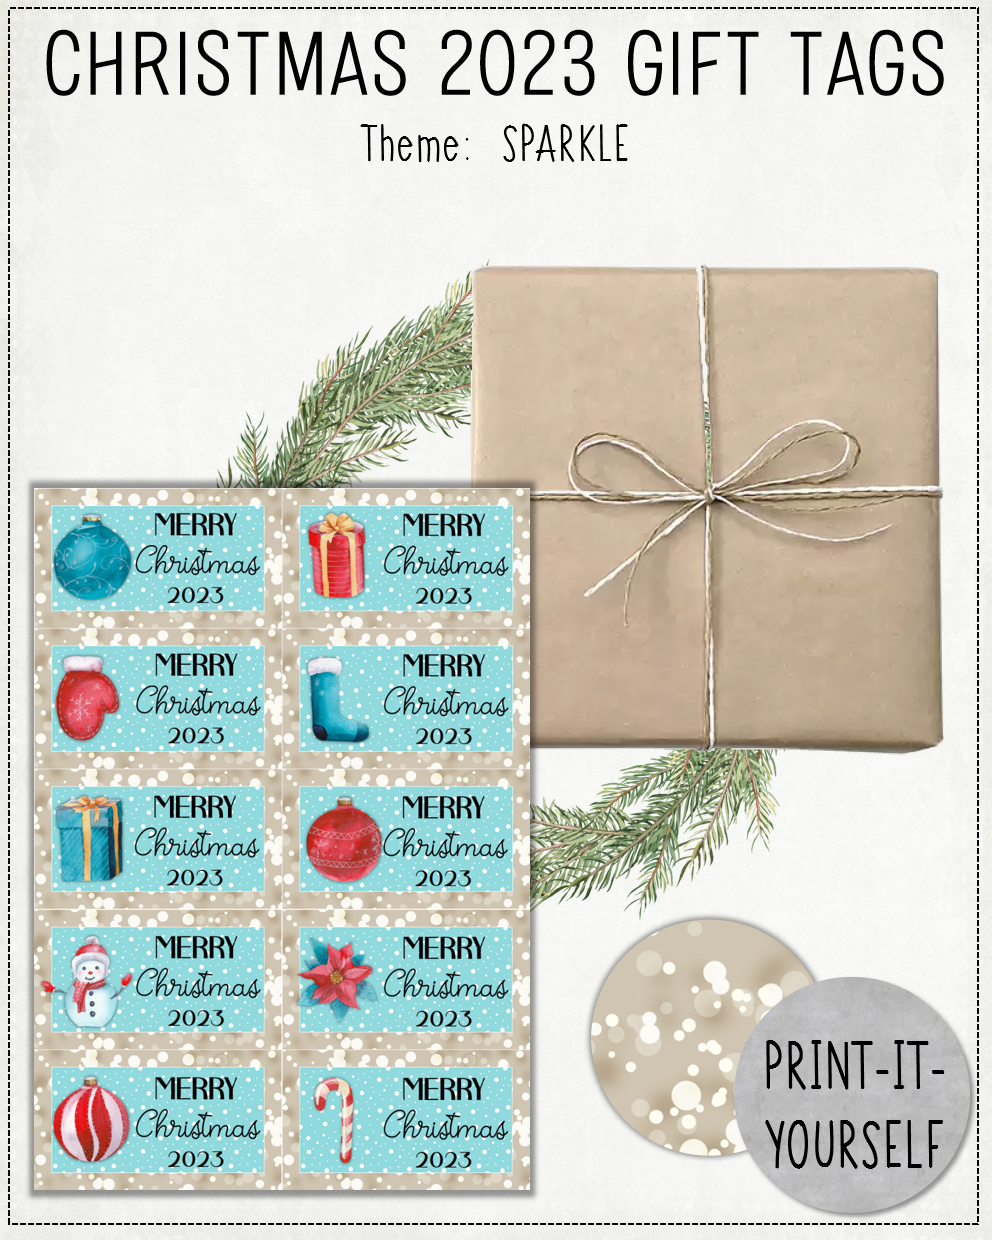 READY TO PRINT:  Christmas 2023 Gift Tags (set of 10) - Sparkle